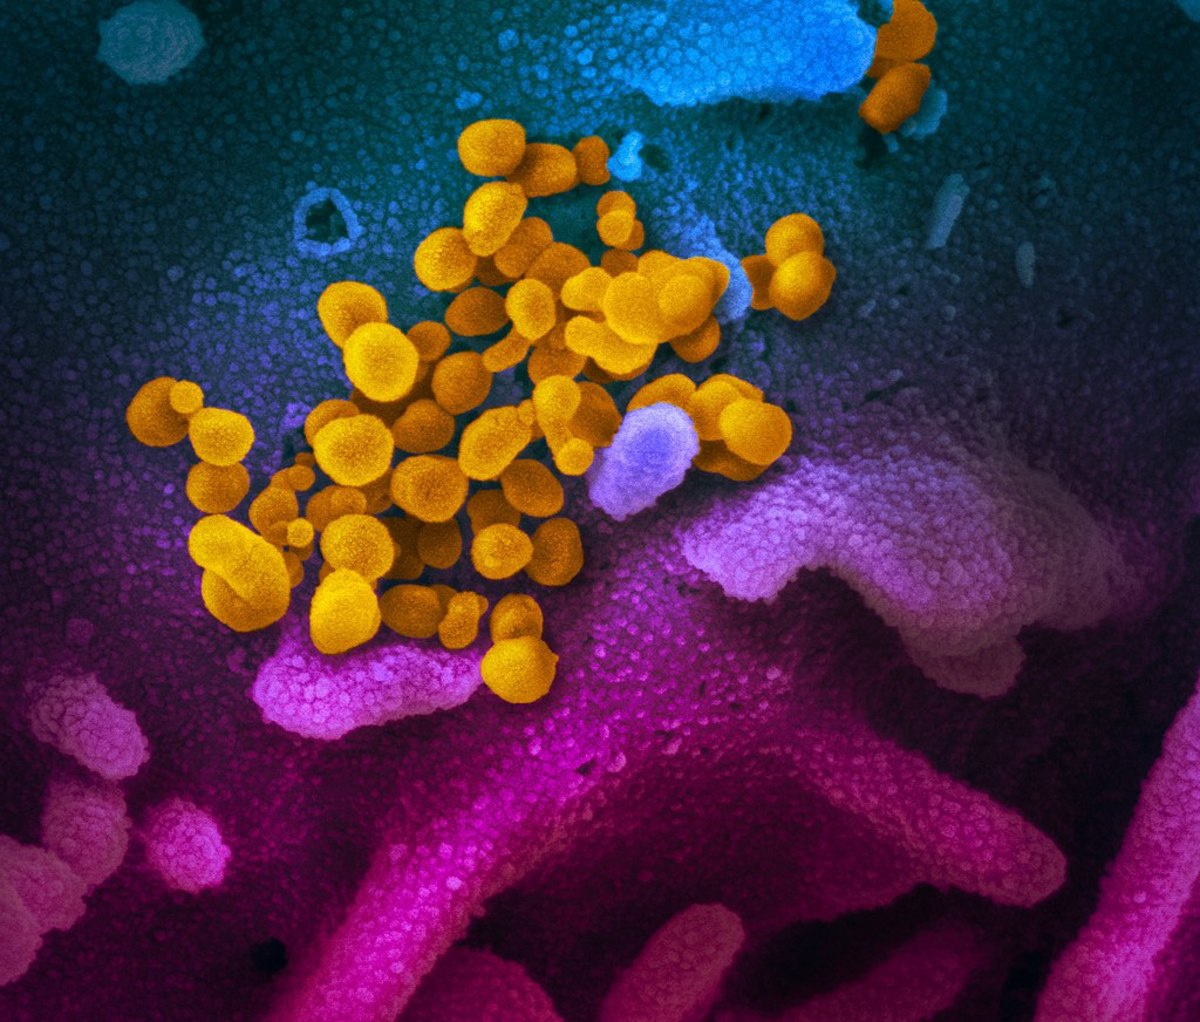 Coronavirus (yellow) emerging from a human cell in the body.